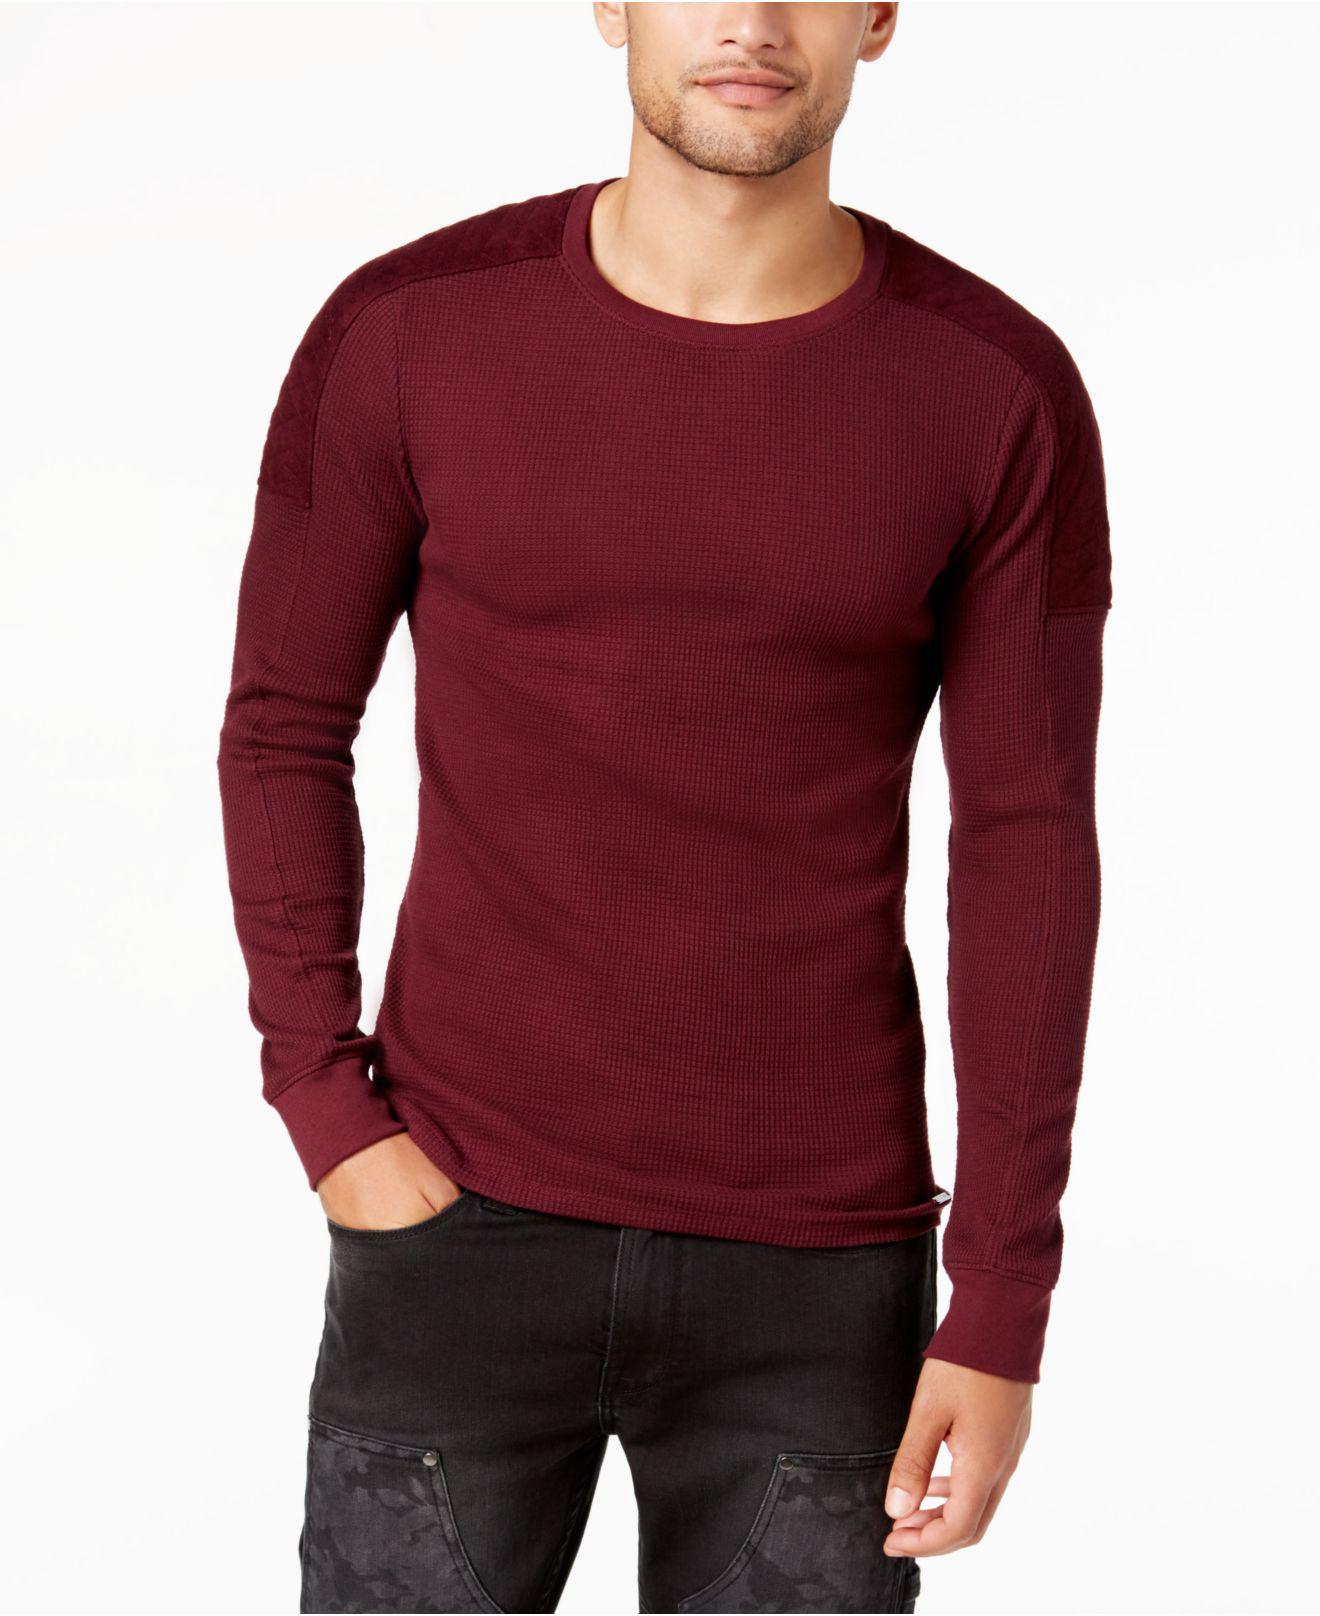 Guess Cotton Men's Long-sleeve Waffle-knit T-shirt in Red for Men - Lyst